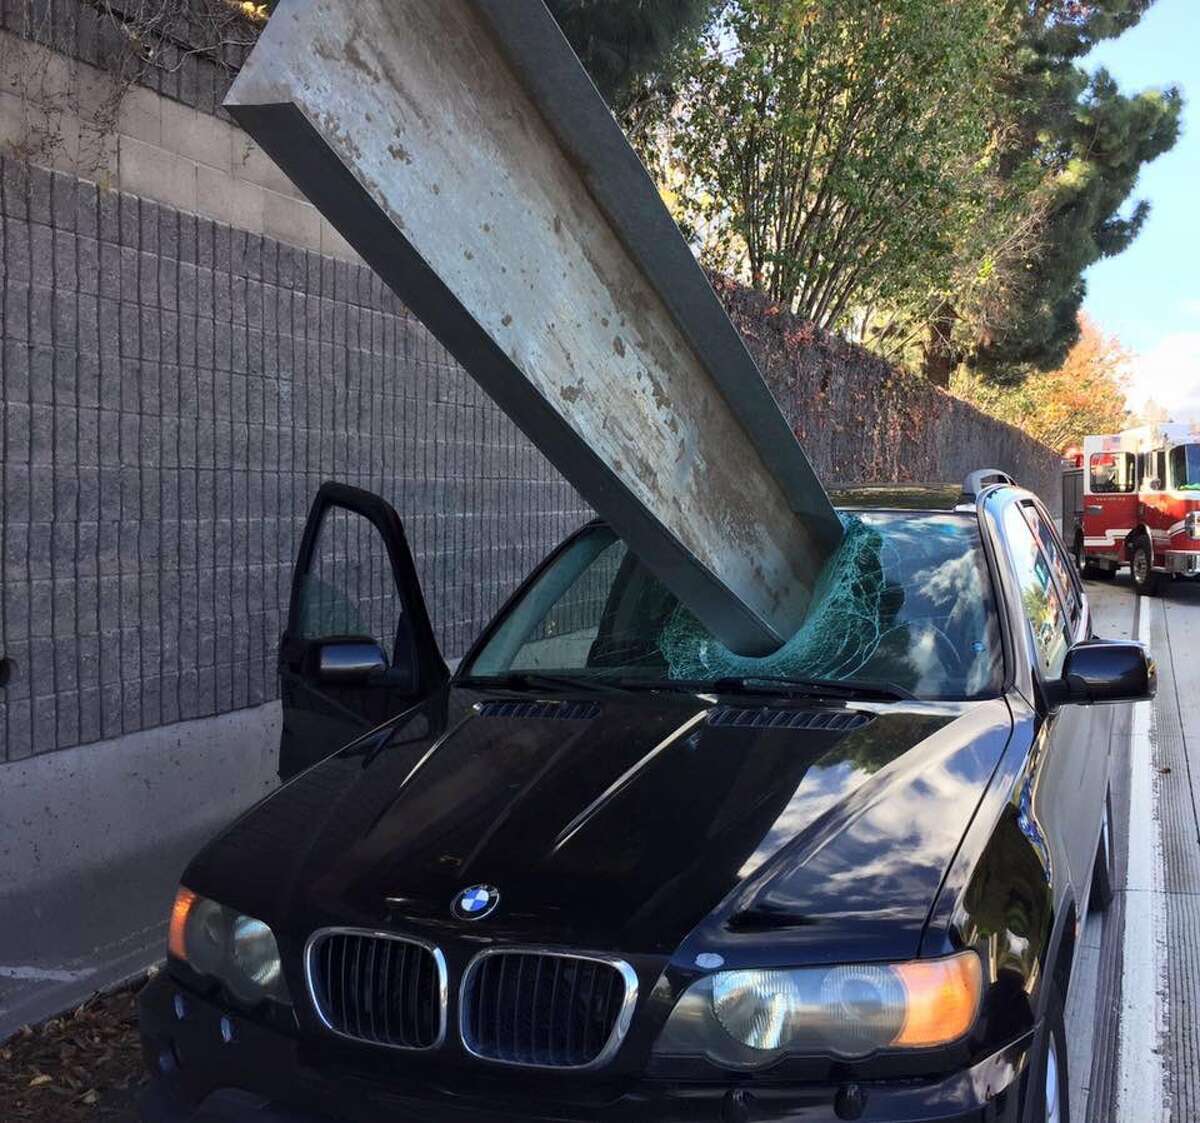 A San Jose driver narrowly escaped a potentially fatal injury on Interstate 280 Friday afternoon, impressing even San Jose firefighters, who tweeted out a photo of a long metal tray sticking out from the front of the man’s car.